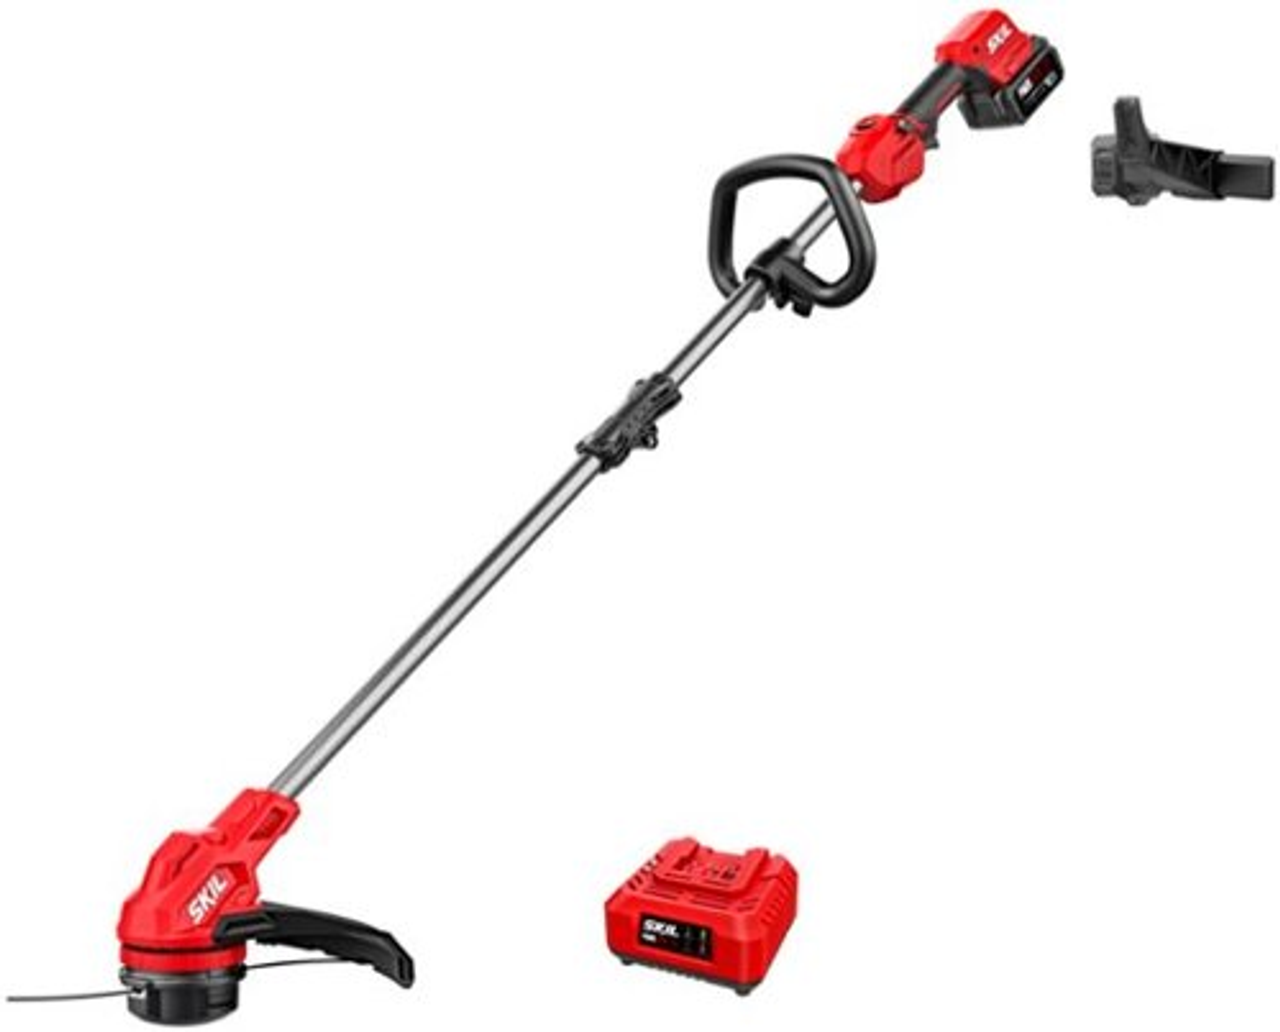 SKIL PWR CORE 20™ Brushless 20V 13-In. String Trimmer with 4.0Ah Battery and Charger - Red/black